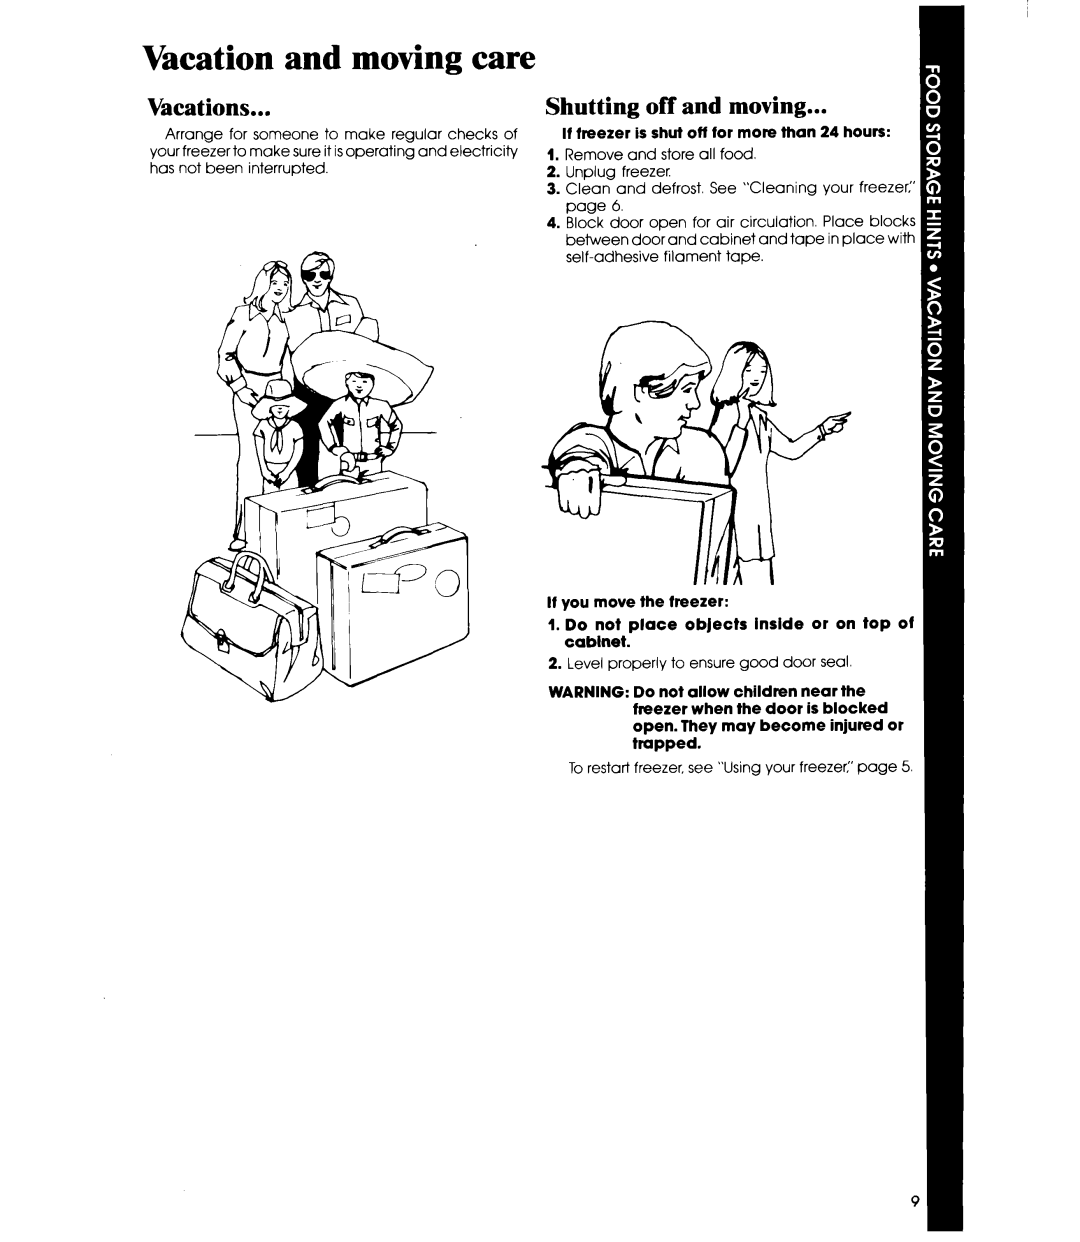 Whirlpool EV090F manual Vacation and moving care, Vacations, Shutting off and moving 